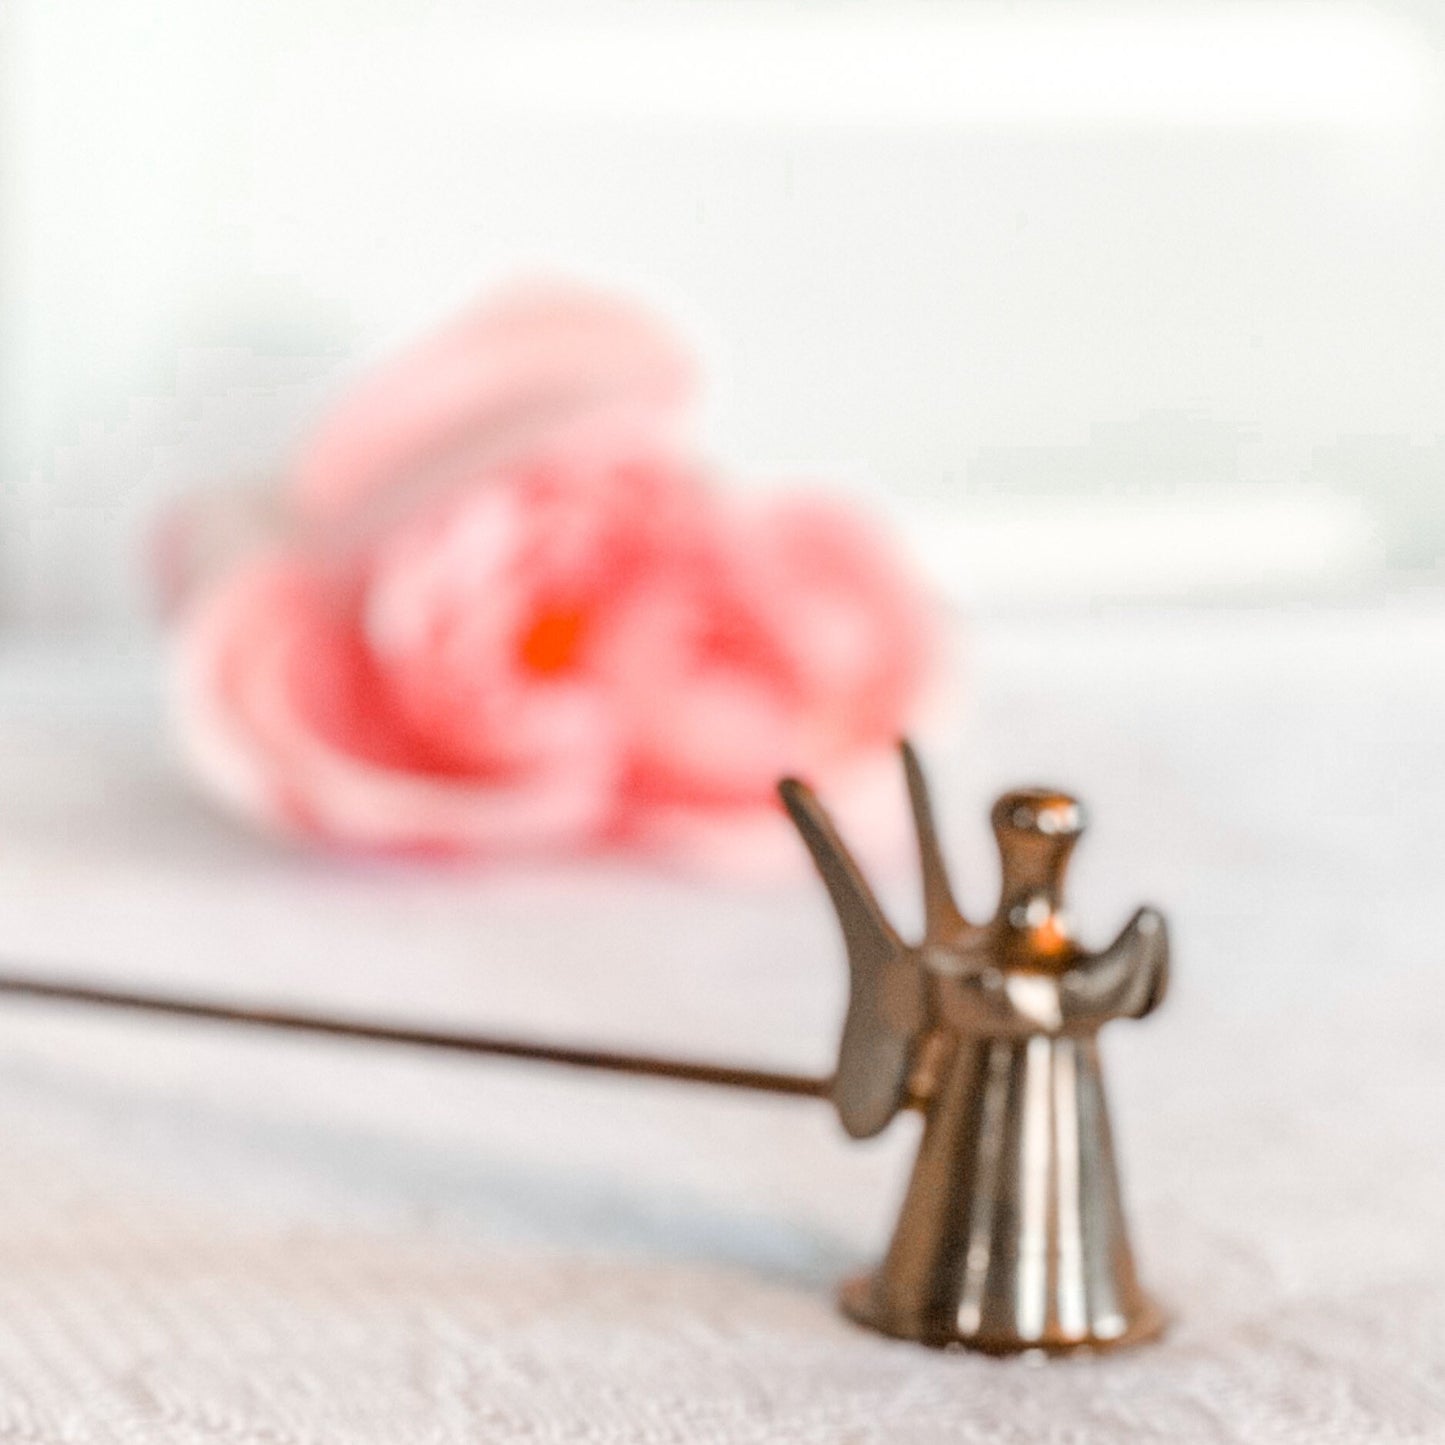 Vintage, Brass Candle Snuffer, Angel, Christmas Gift For Her